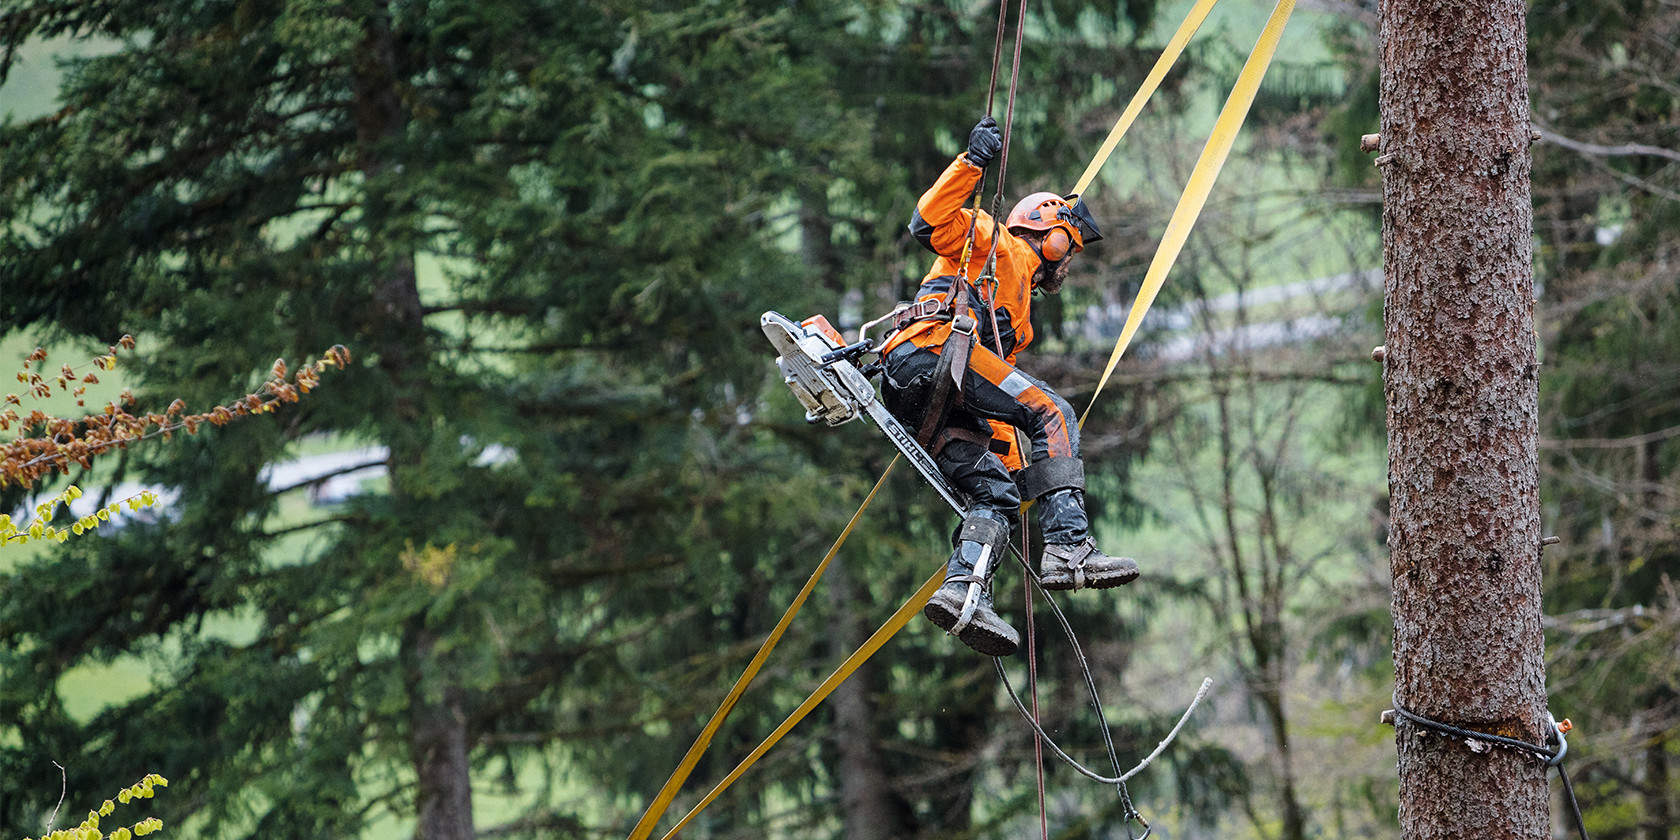 When used in the tree canopy, or for felling or pruning, the STIHL MS 462 proves that it is not just lightweight, but also extremely powerful.